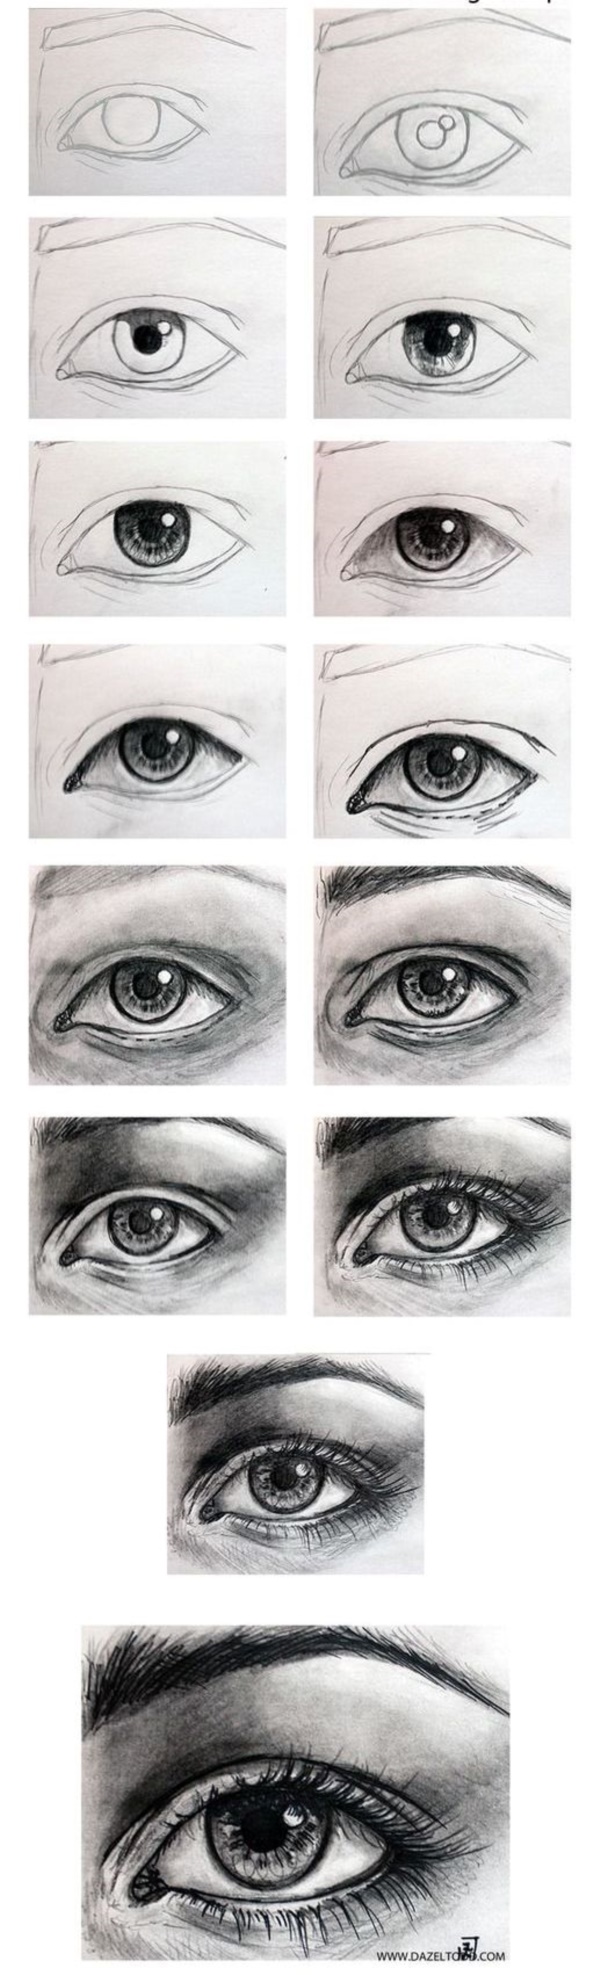 how-to-draw-an-eye0351